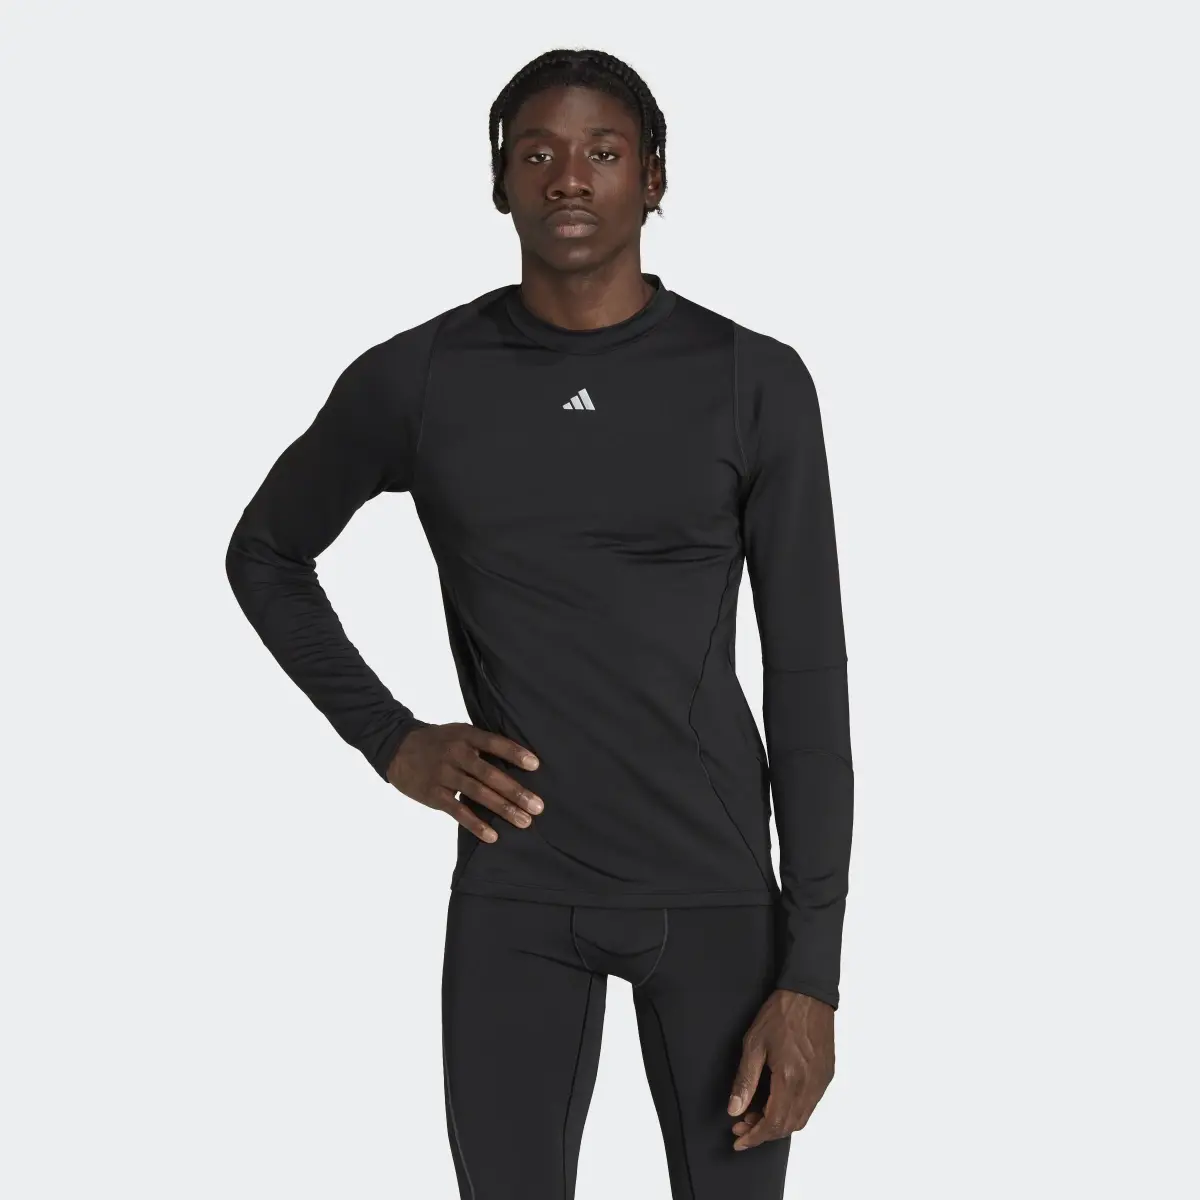 Adidas Techfit COLD.RDY Training Long-Sleeve Top. 2